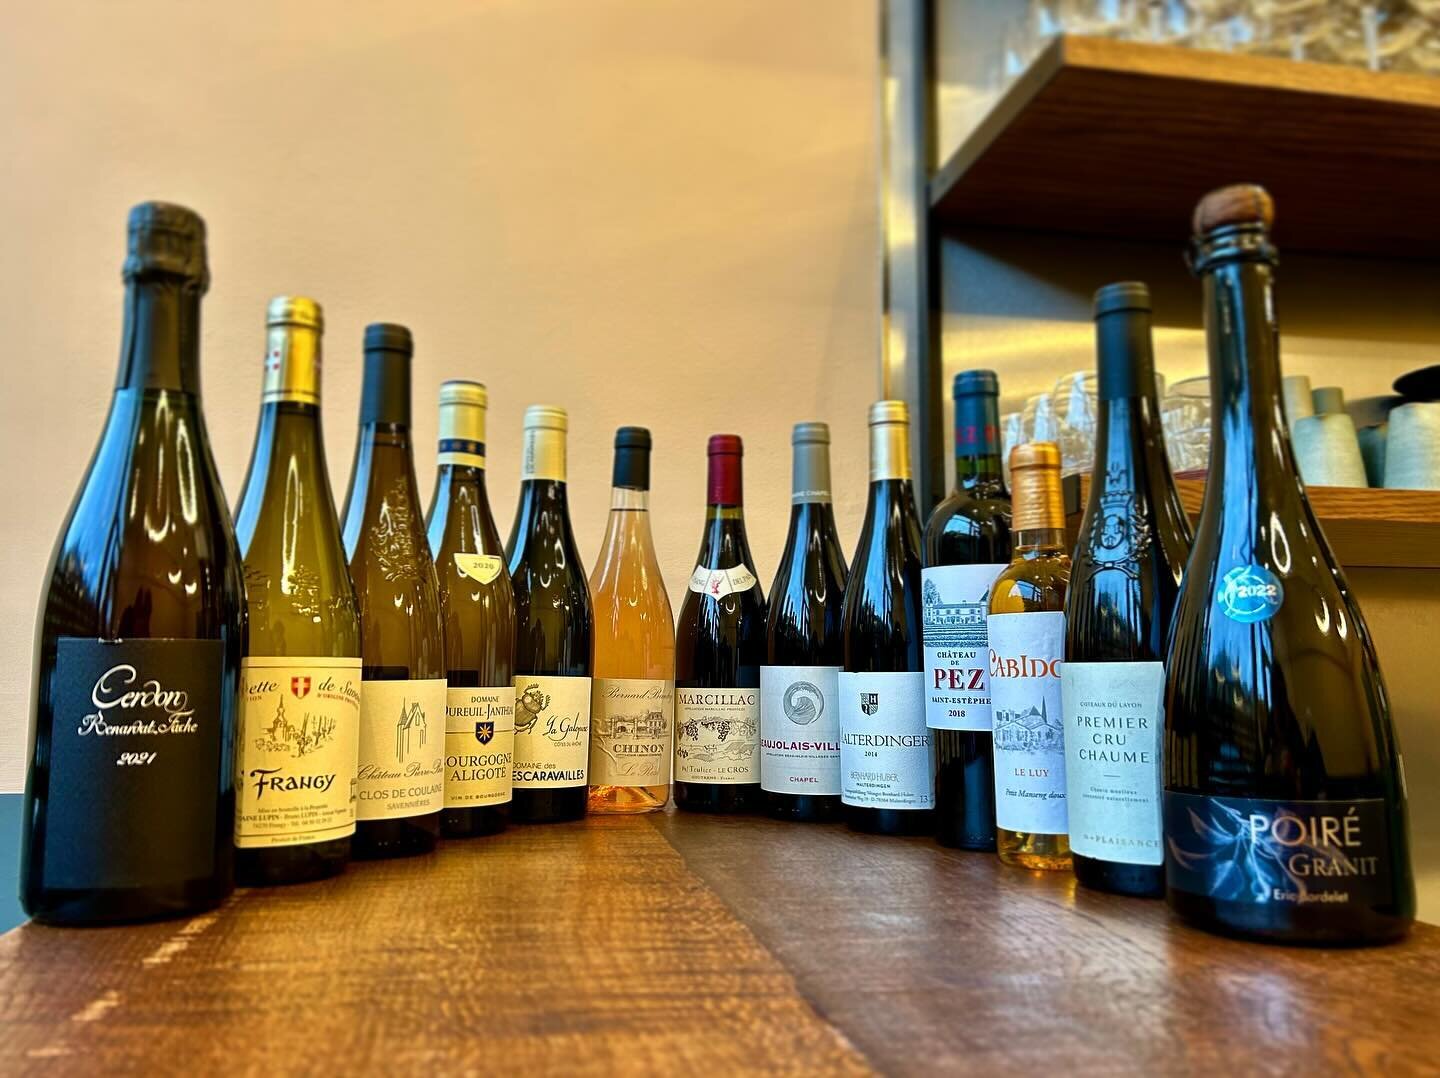 We&rsquo;ve expanded our bijou wine list lately with all of these new favourites. And on the 30th and 31st December you can come and enjoy them with some festive bites, in a relaxed setting.
⠀⠀⠀⠀⠀⠀⠀⠀⠀
Instead of our usual multi-course menu, we&rsquo;